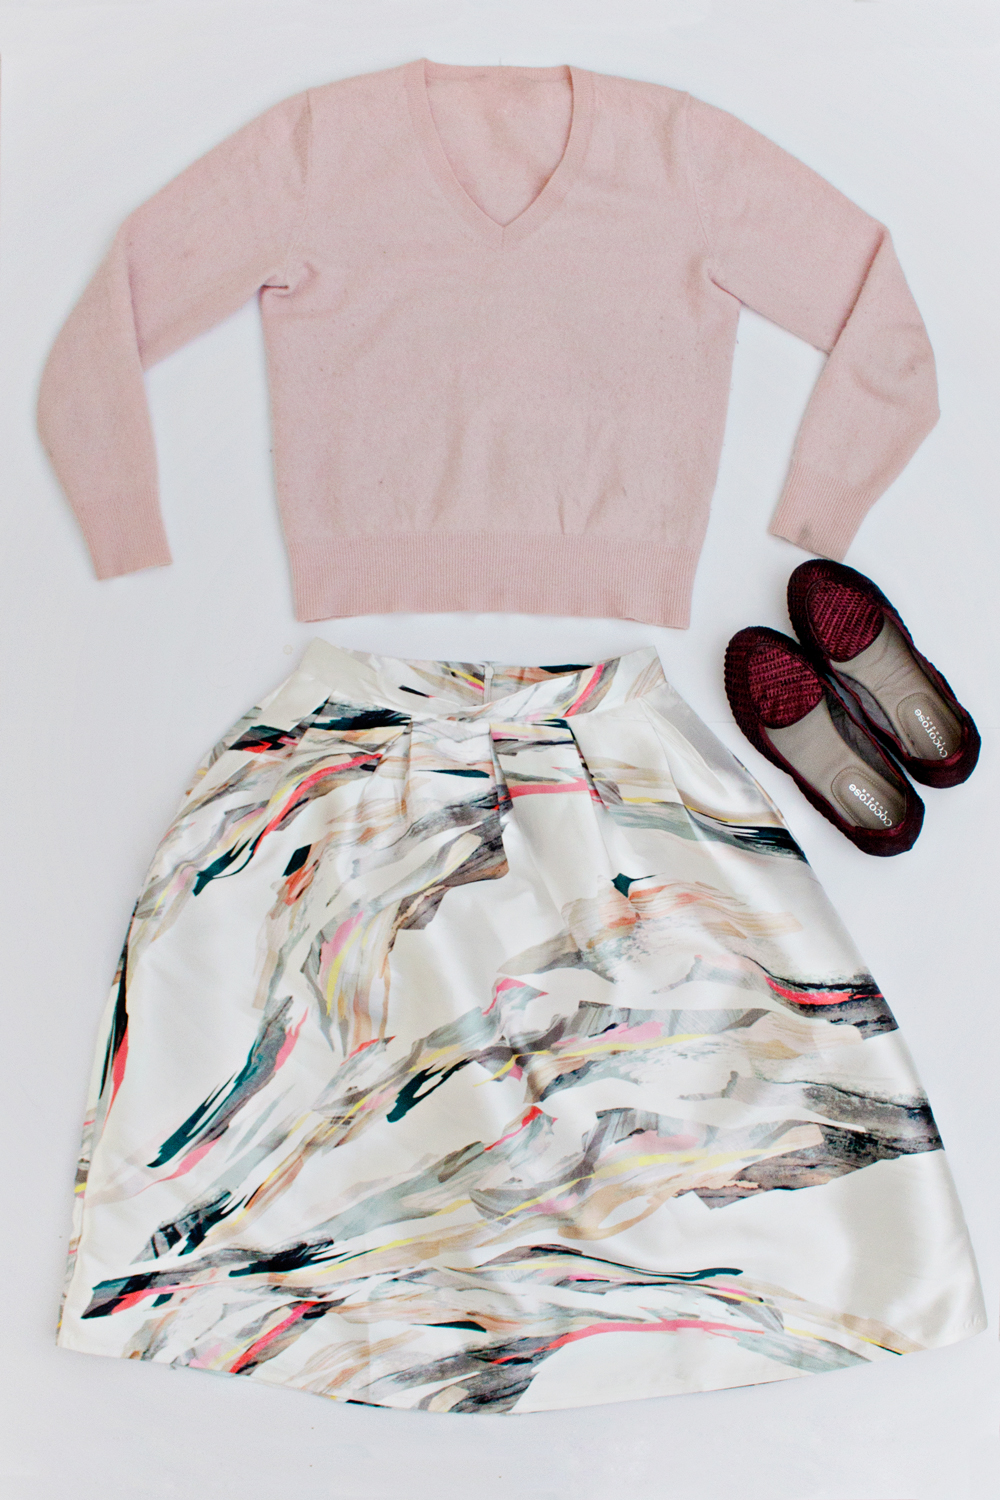 OUTFIT | How to Style a Shirt & Skirt 